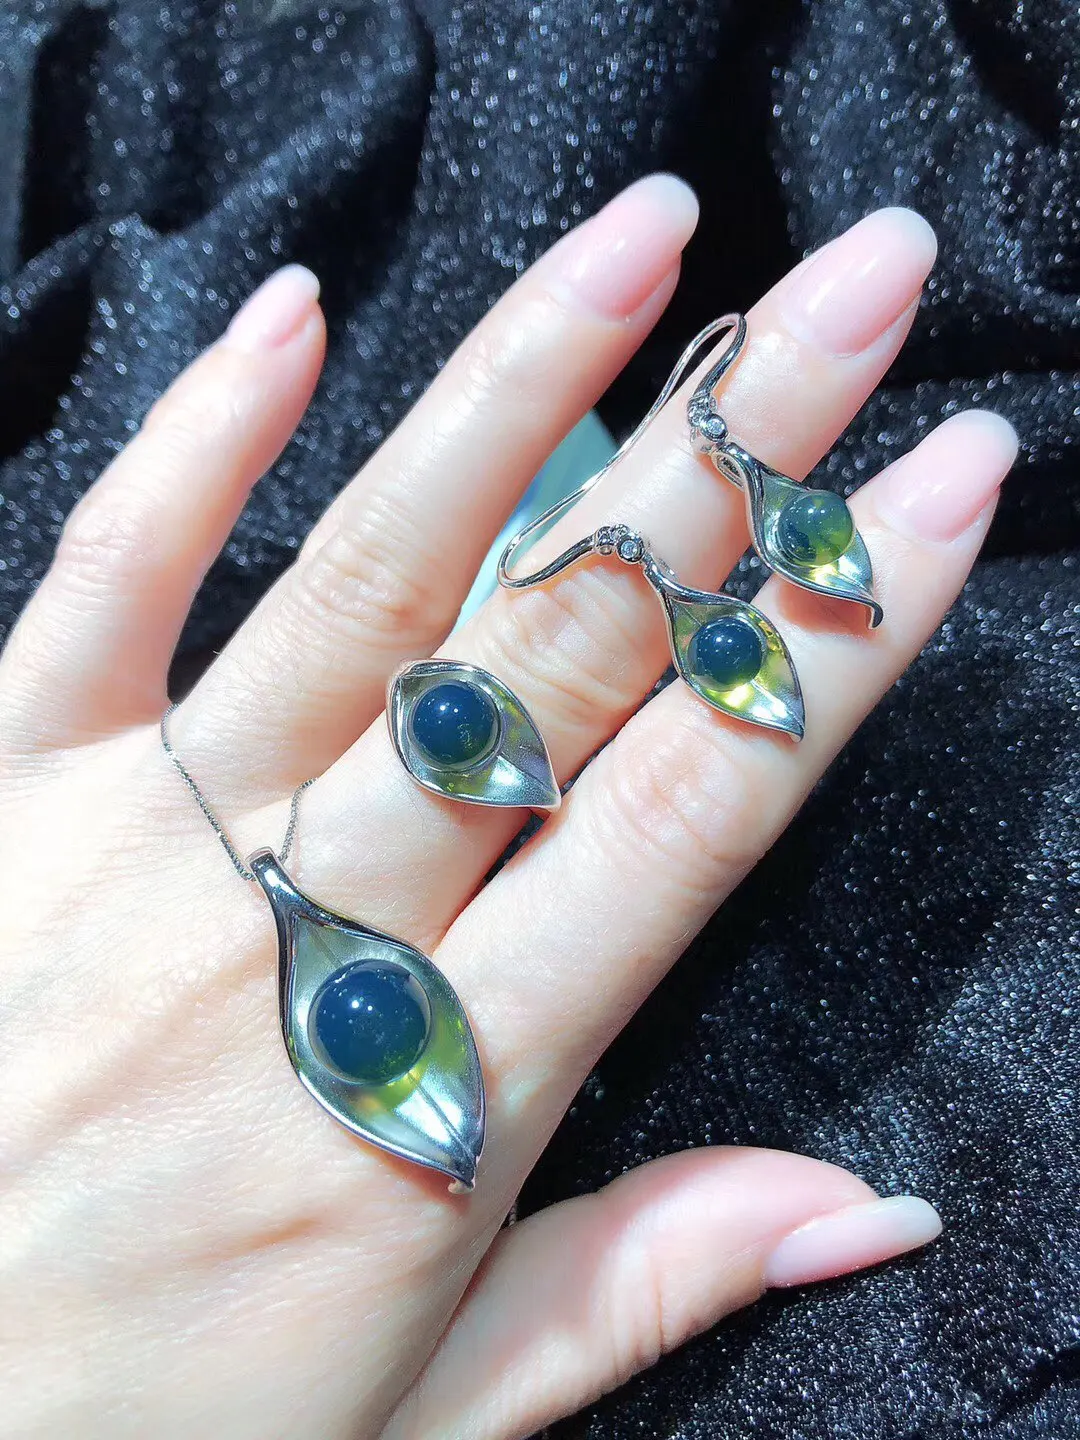 

New Leaf Natural Blue Amber Women Jewelry Pendant Earrings Ring Set Adjustable Size Amber S925 Silver Anillos Oorbellen Bijoux